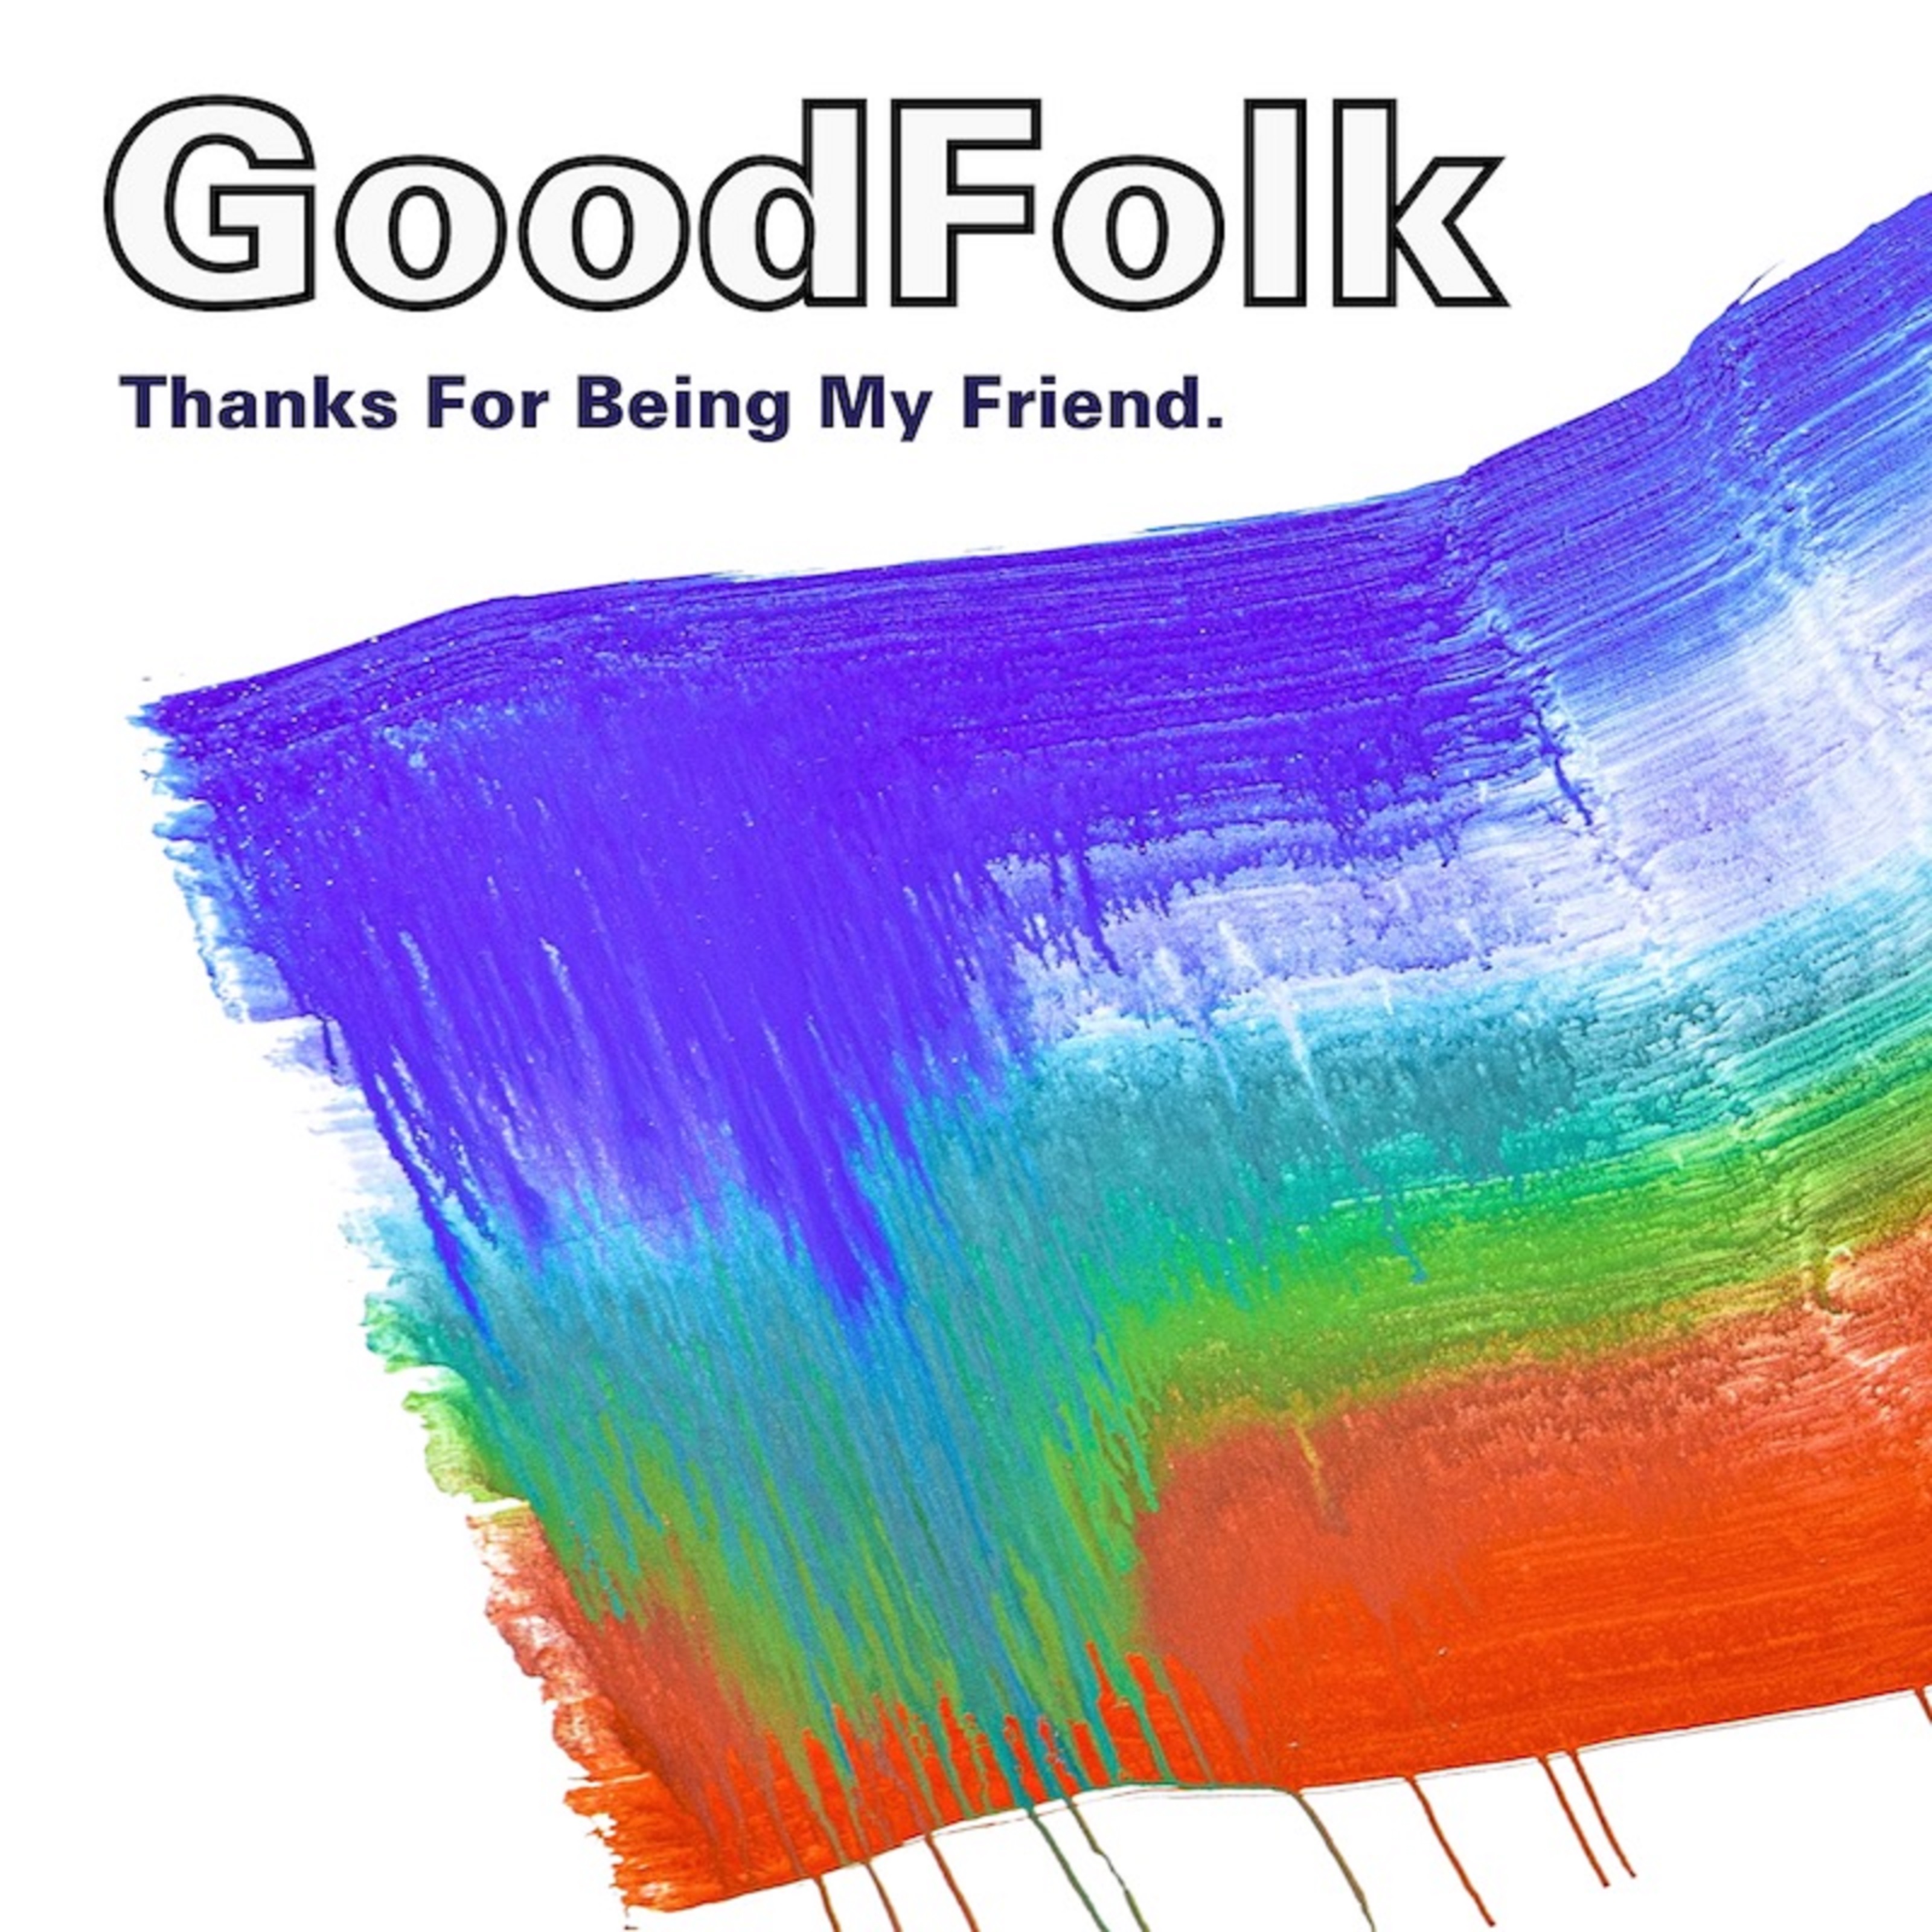 Mark Pietrovito (formerly of Part & Parcel) to release a new album under the name “GoodFolk.”